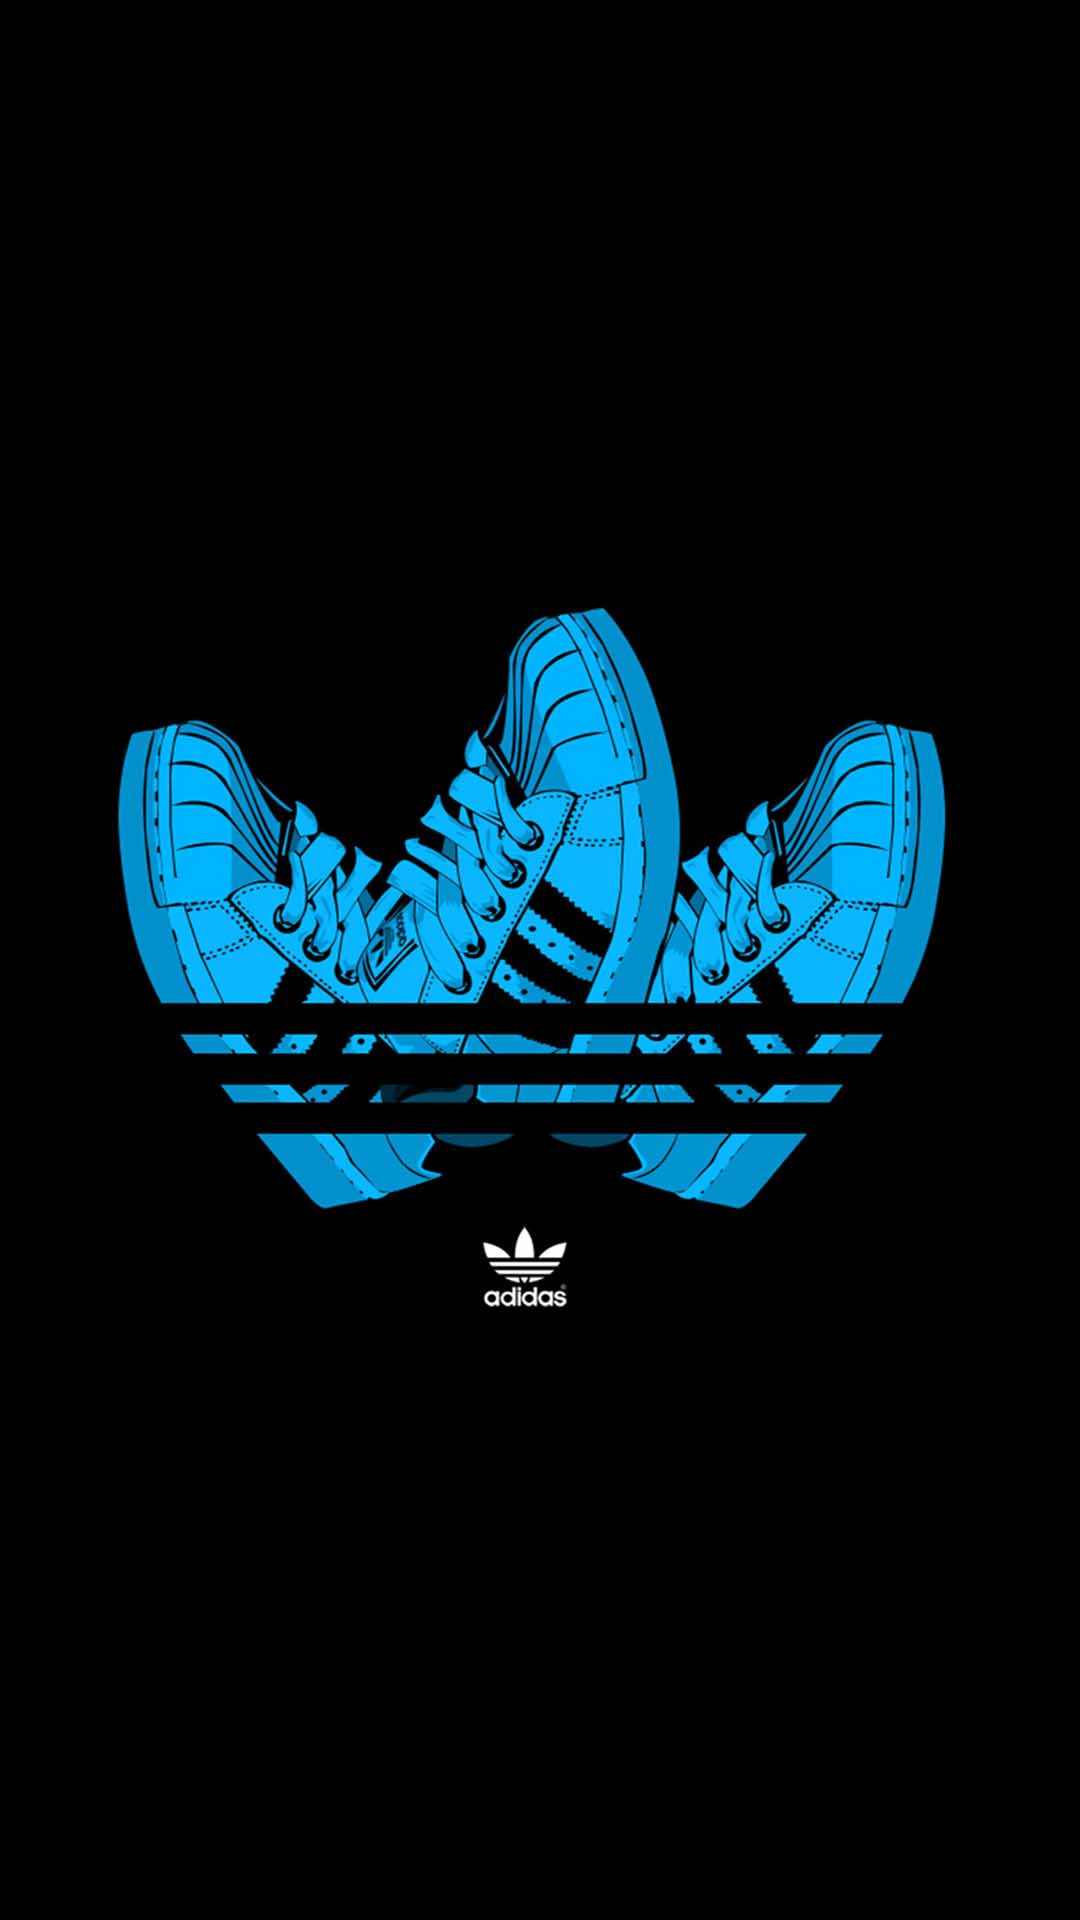 Adidas Wallpaper for iPhone Pro Max, X, 6